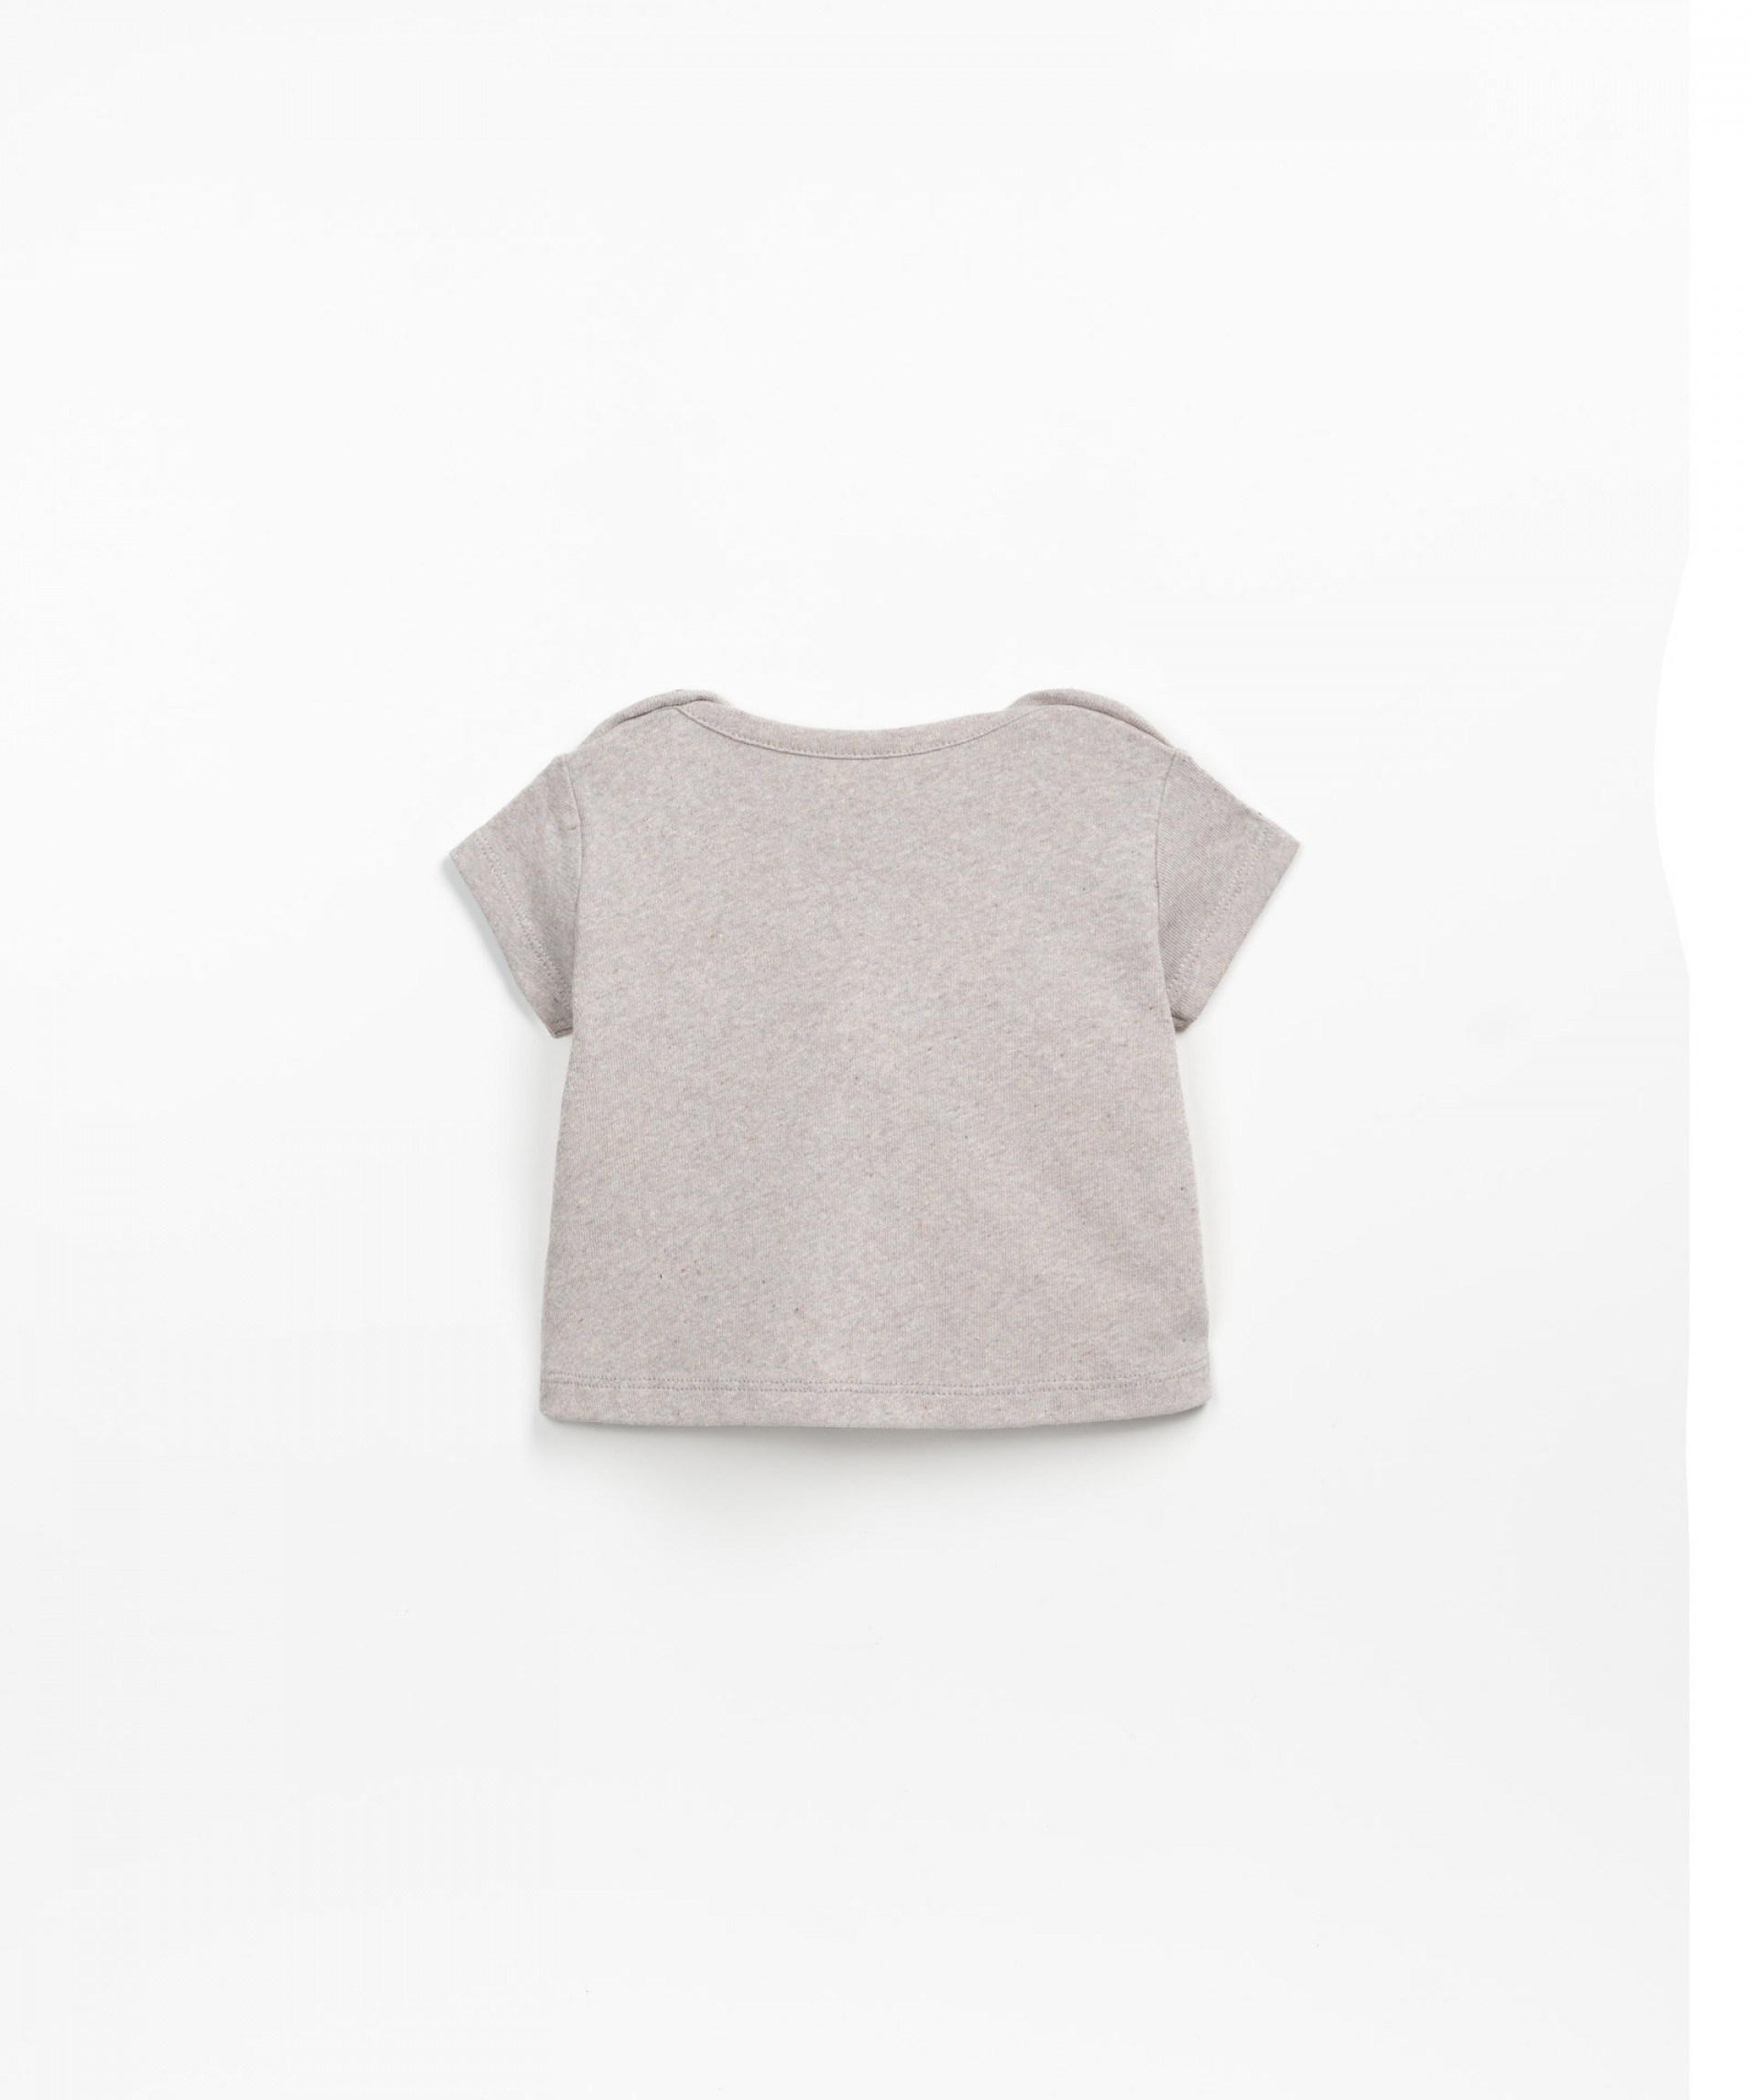 T-shirt with shoulder opening | Textile Art